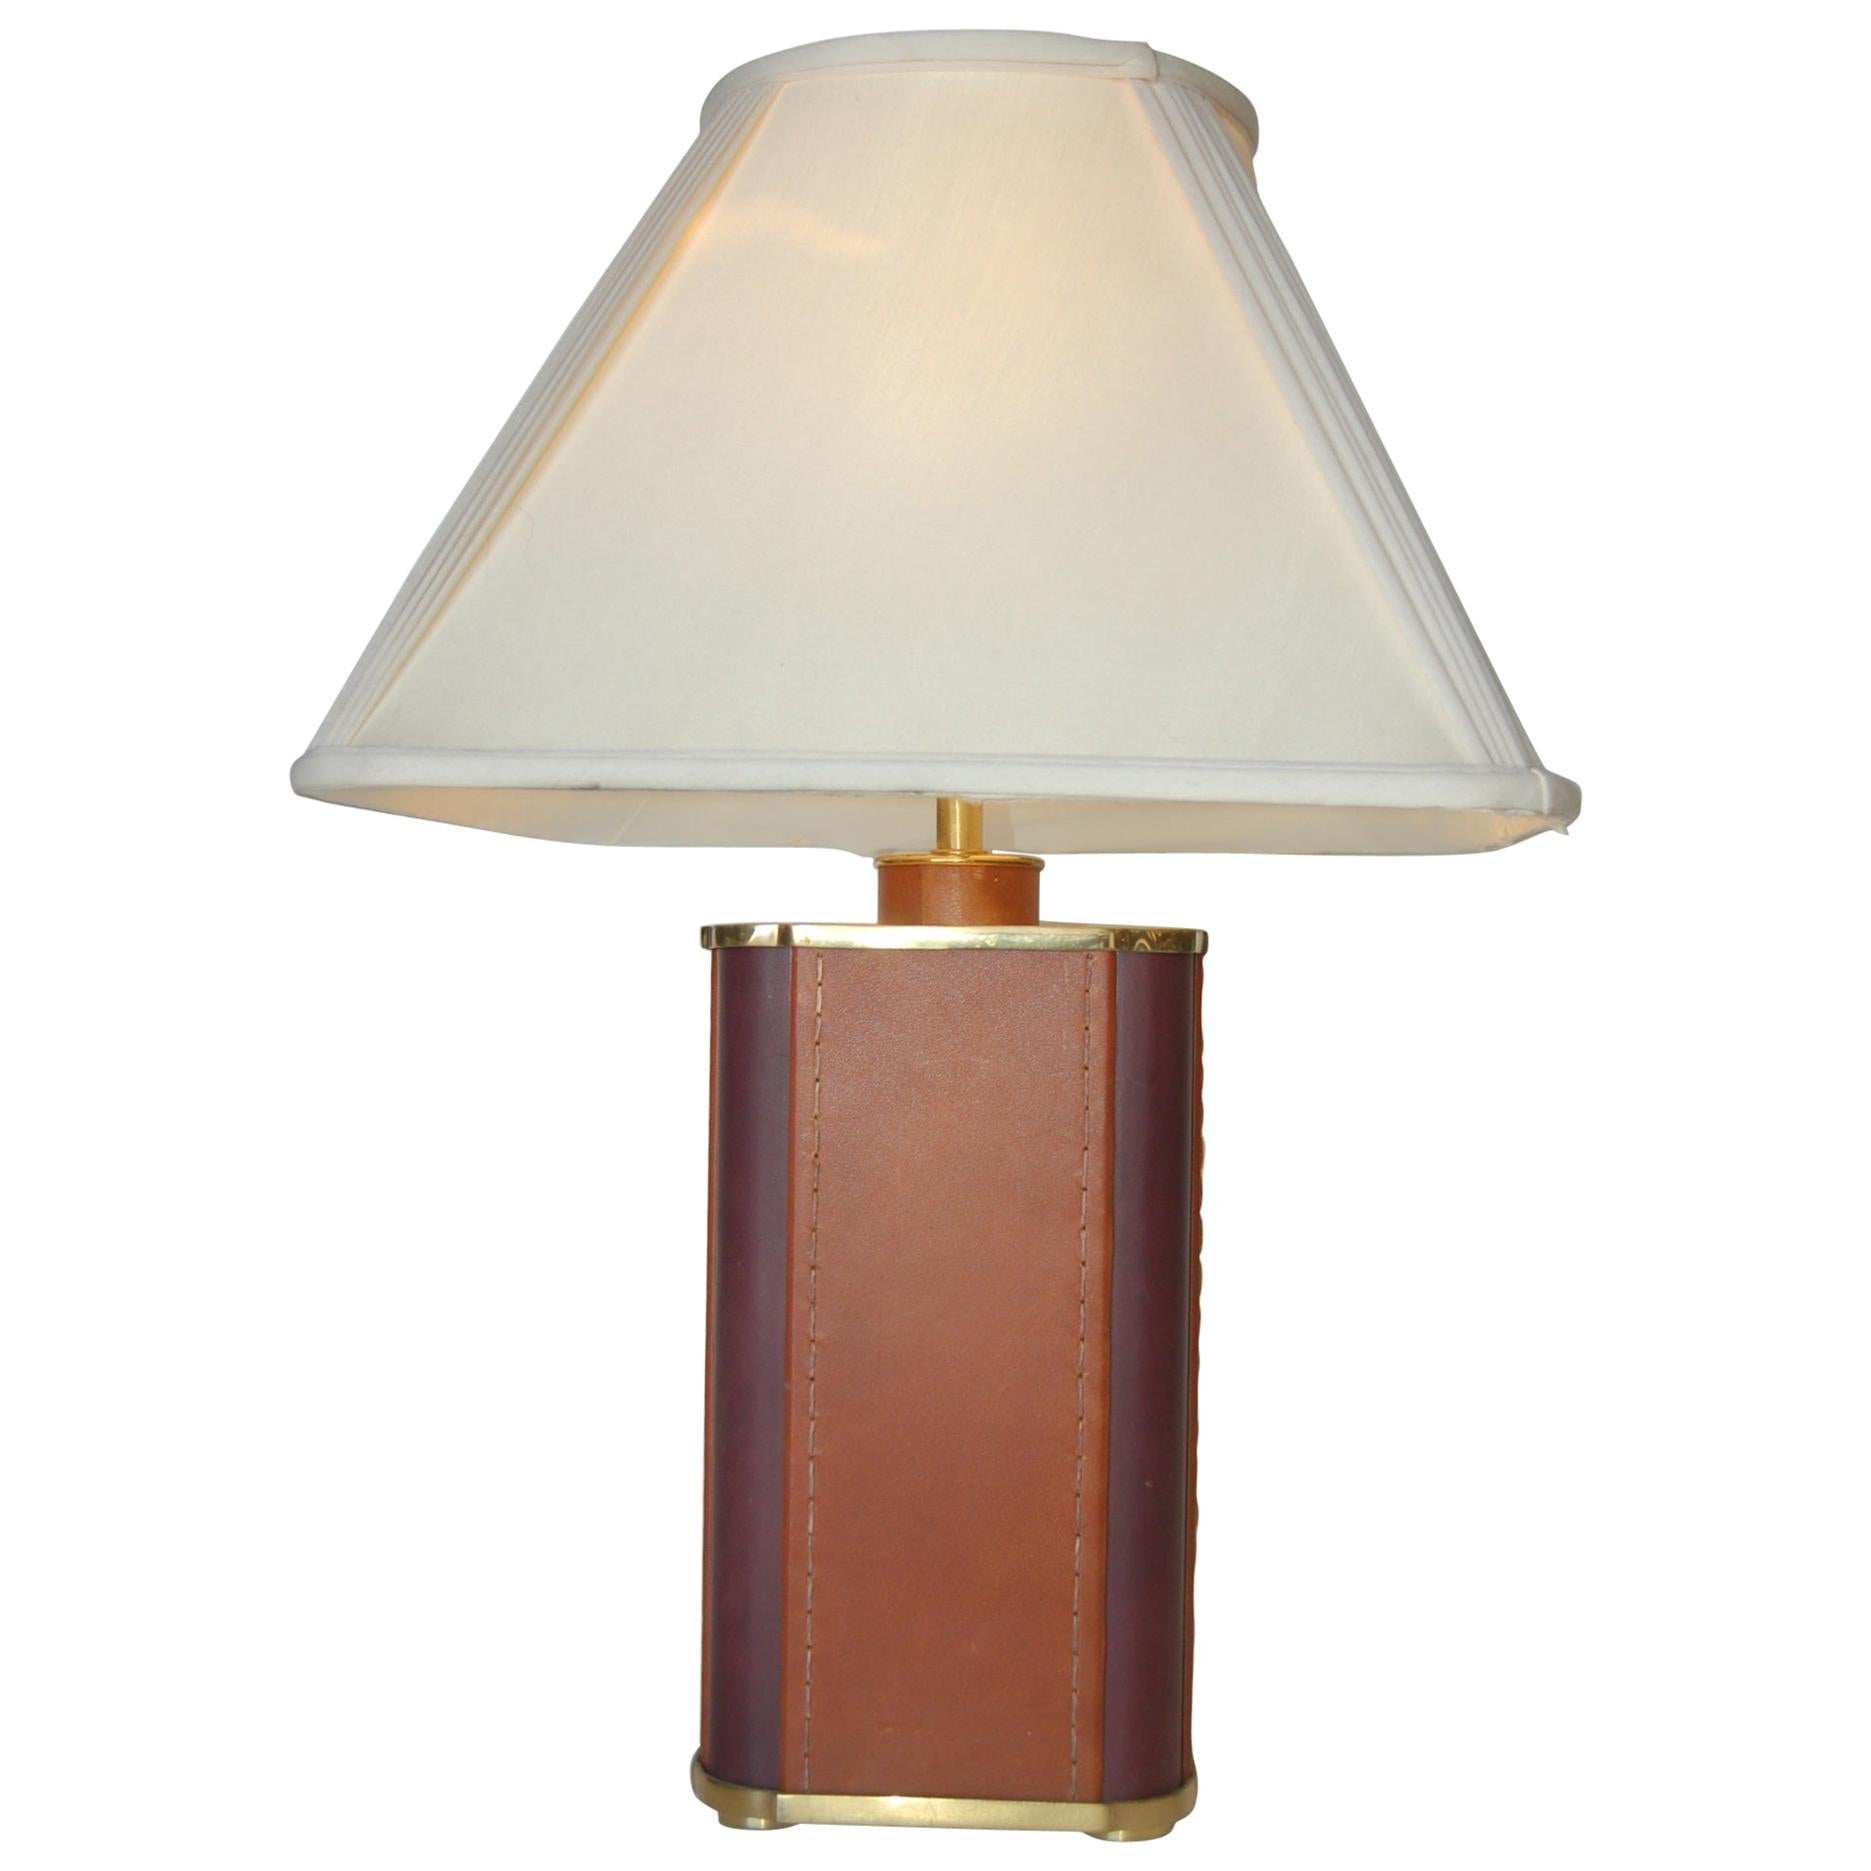 Two-Toned Square Leather Wrapped Table Lamp with Gold Trim For Sale